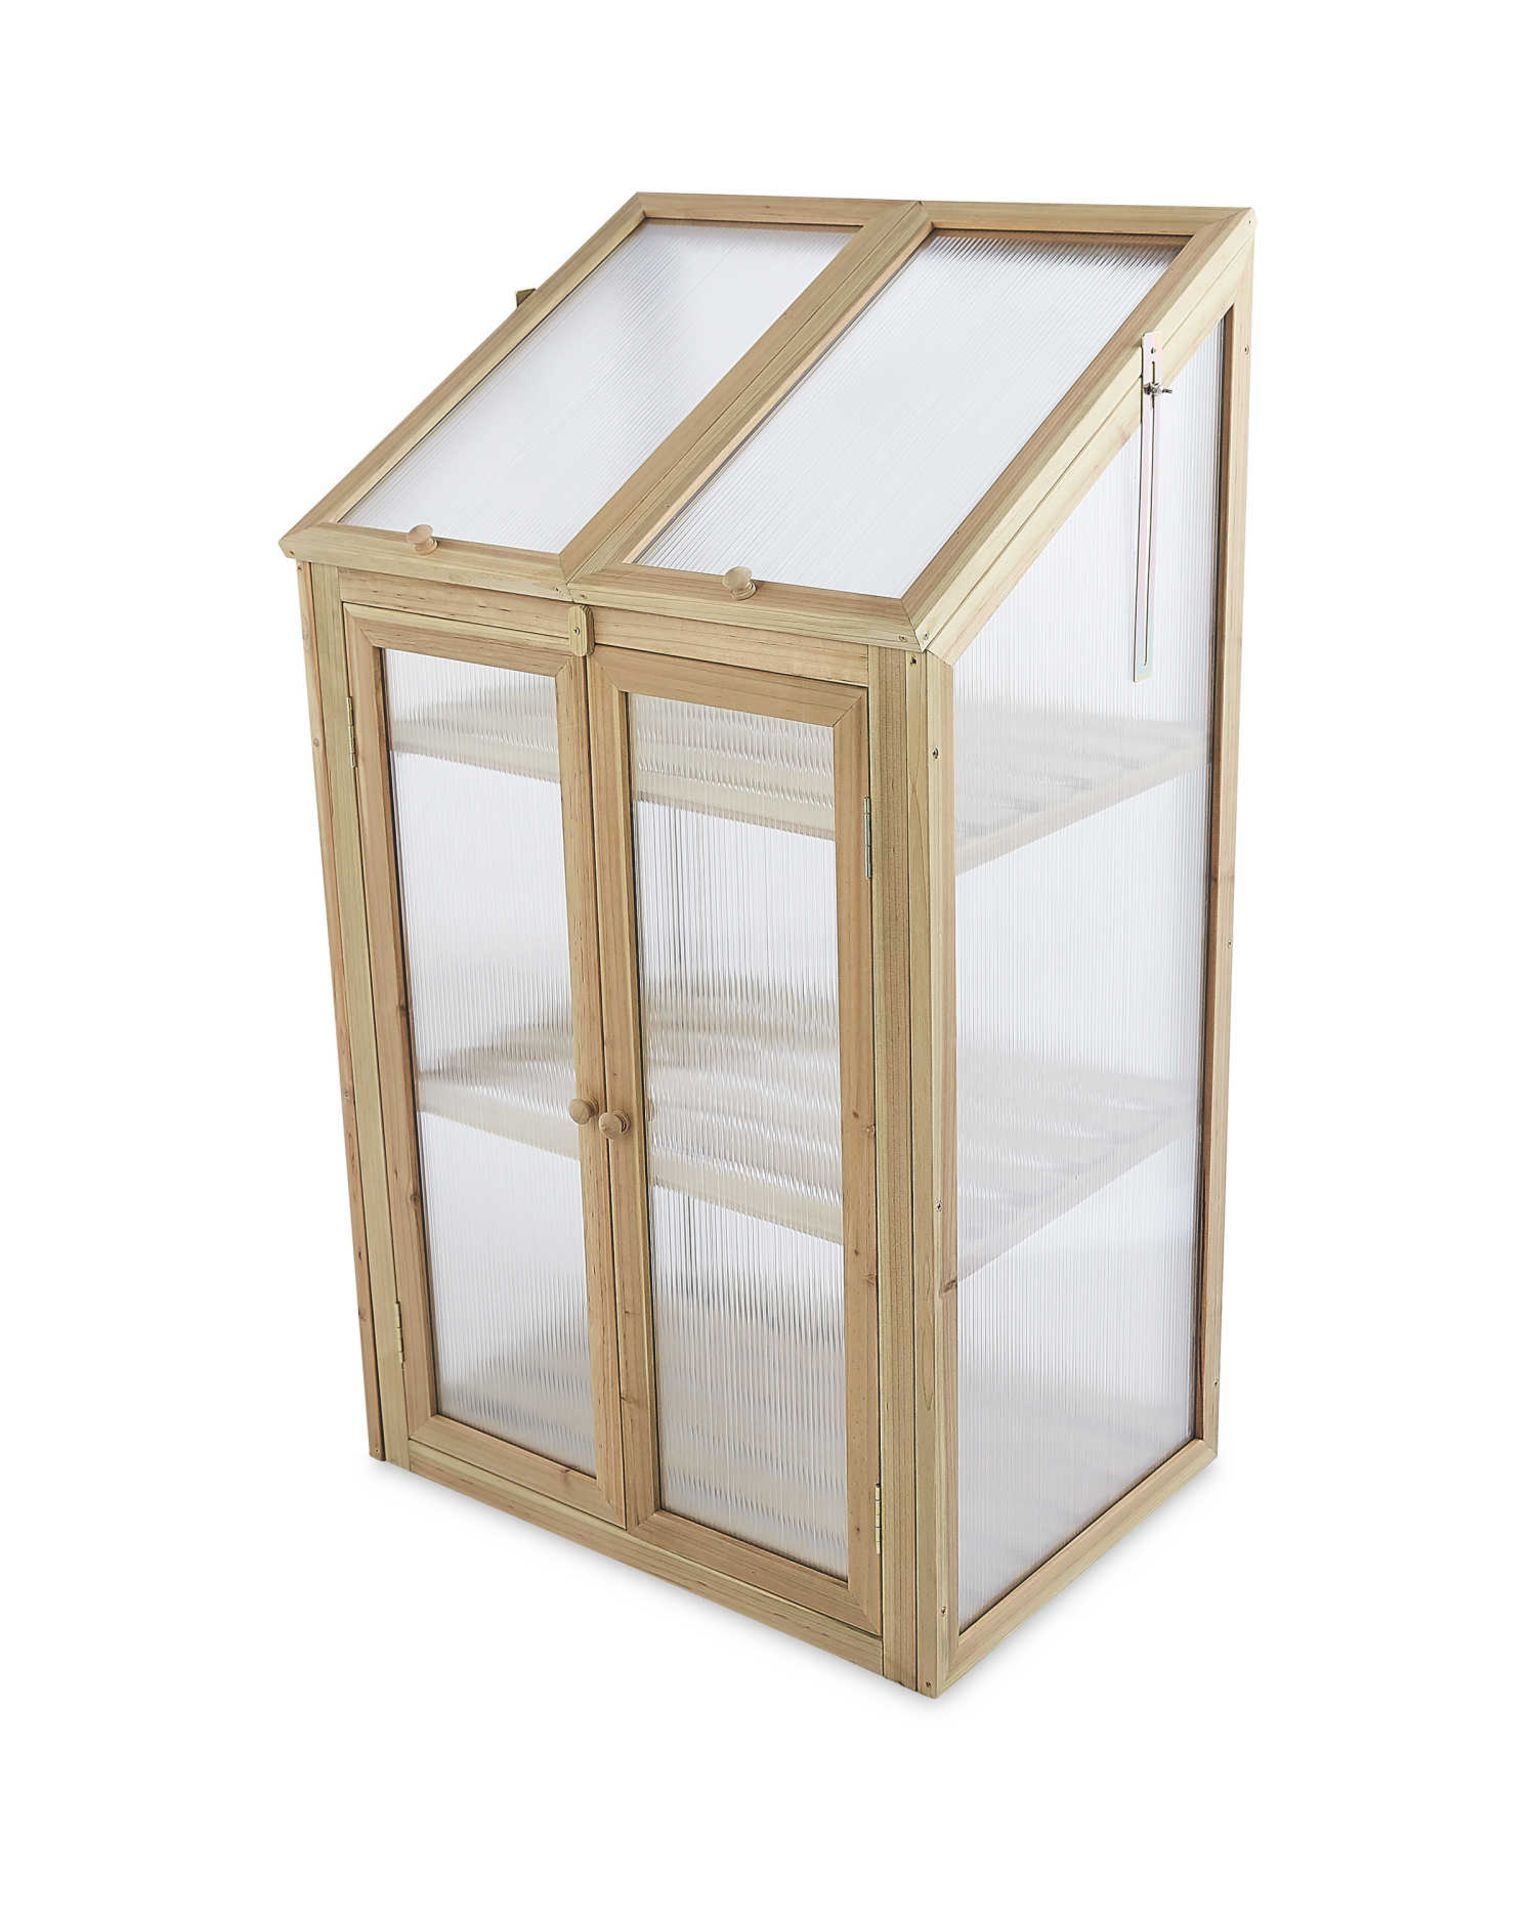 Natural Wooden Mini Greenhouse. Made from 100% sustainable fir wood, this Natural Wooden Mini